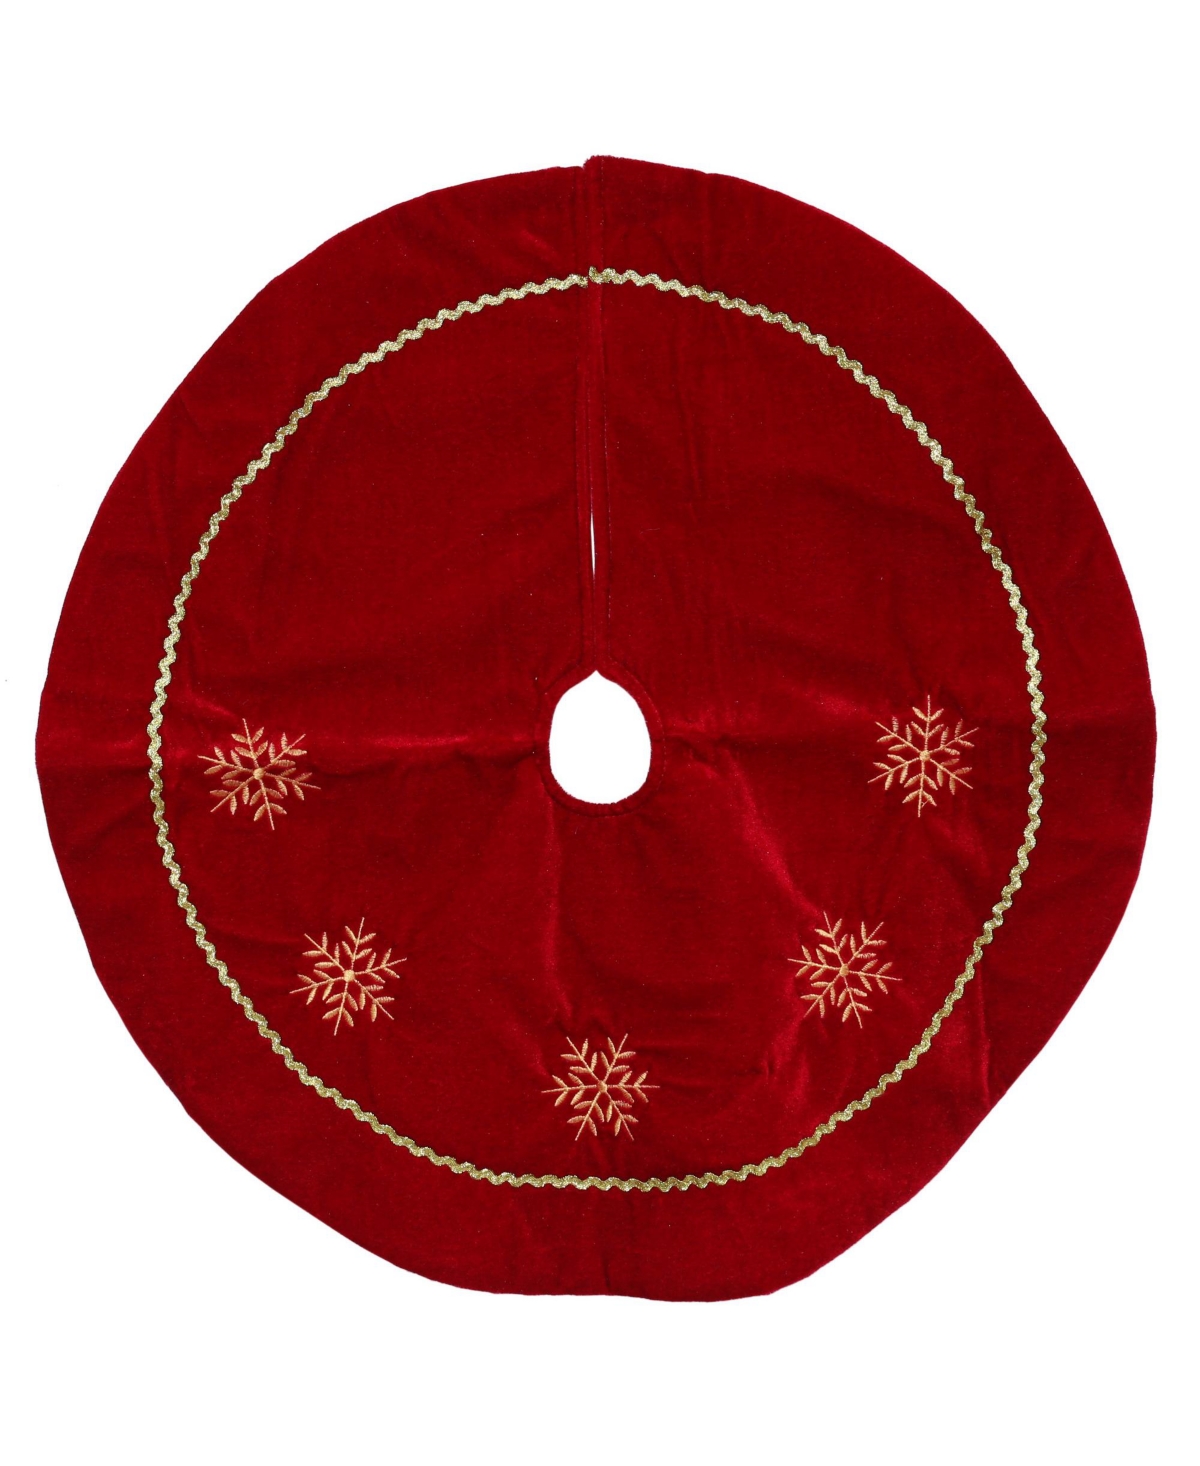 Northlight Snowflakes Christmas Tree Skirt, 24" In Red